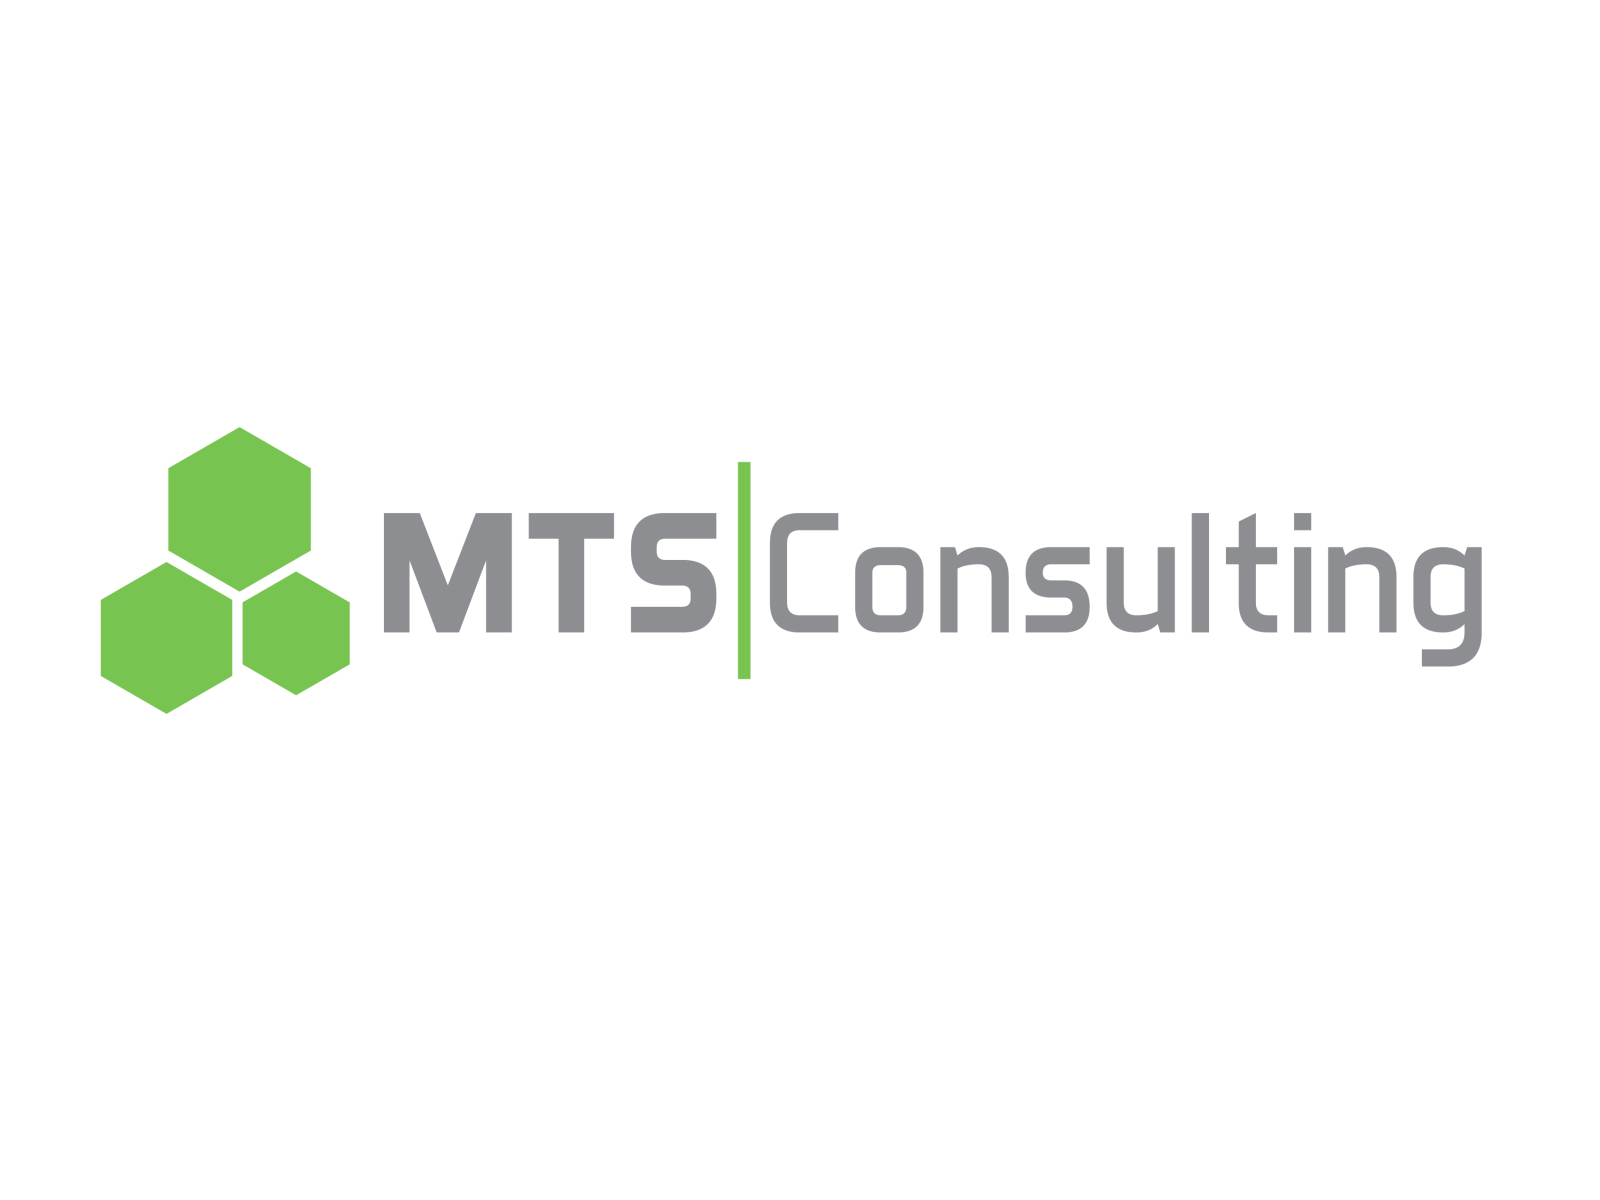 MTS CONSULTING LOGO by Sameh Radwan on Dribbble